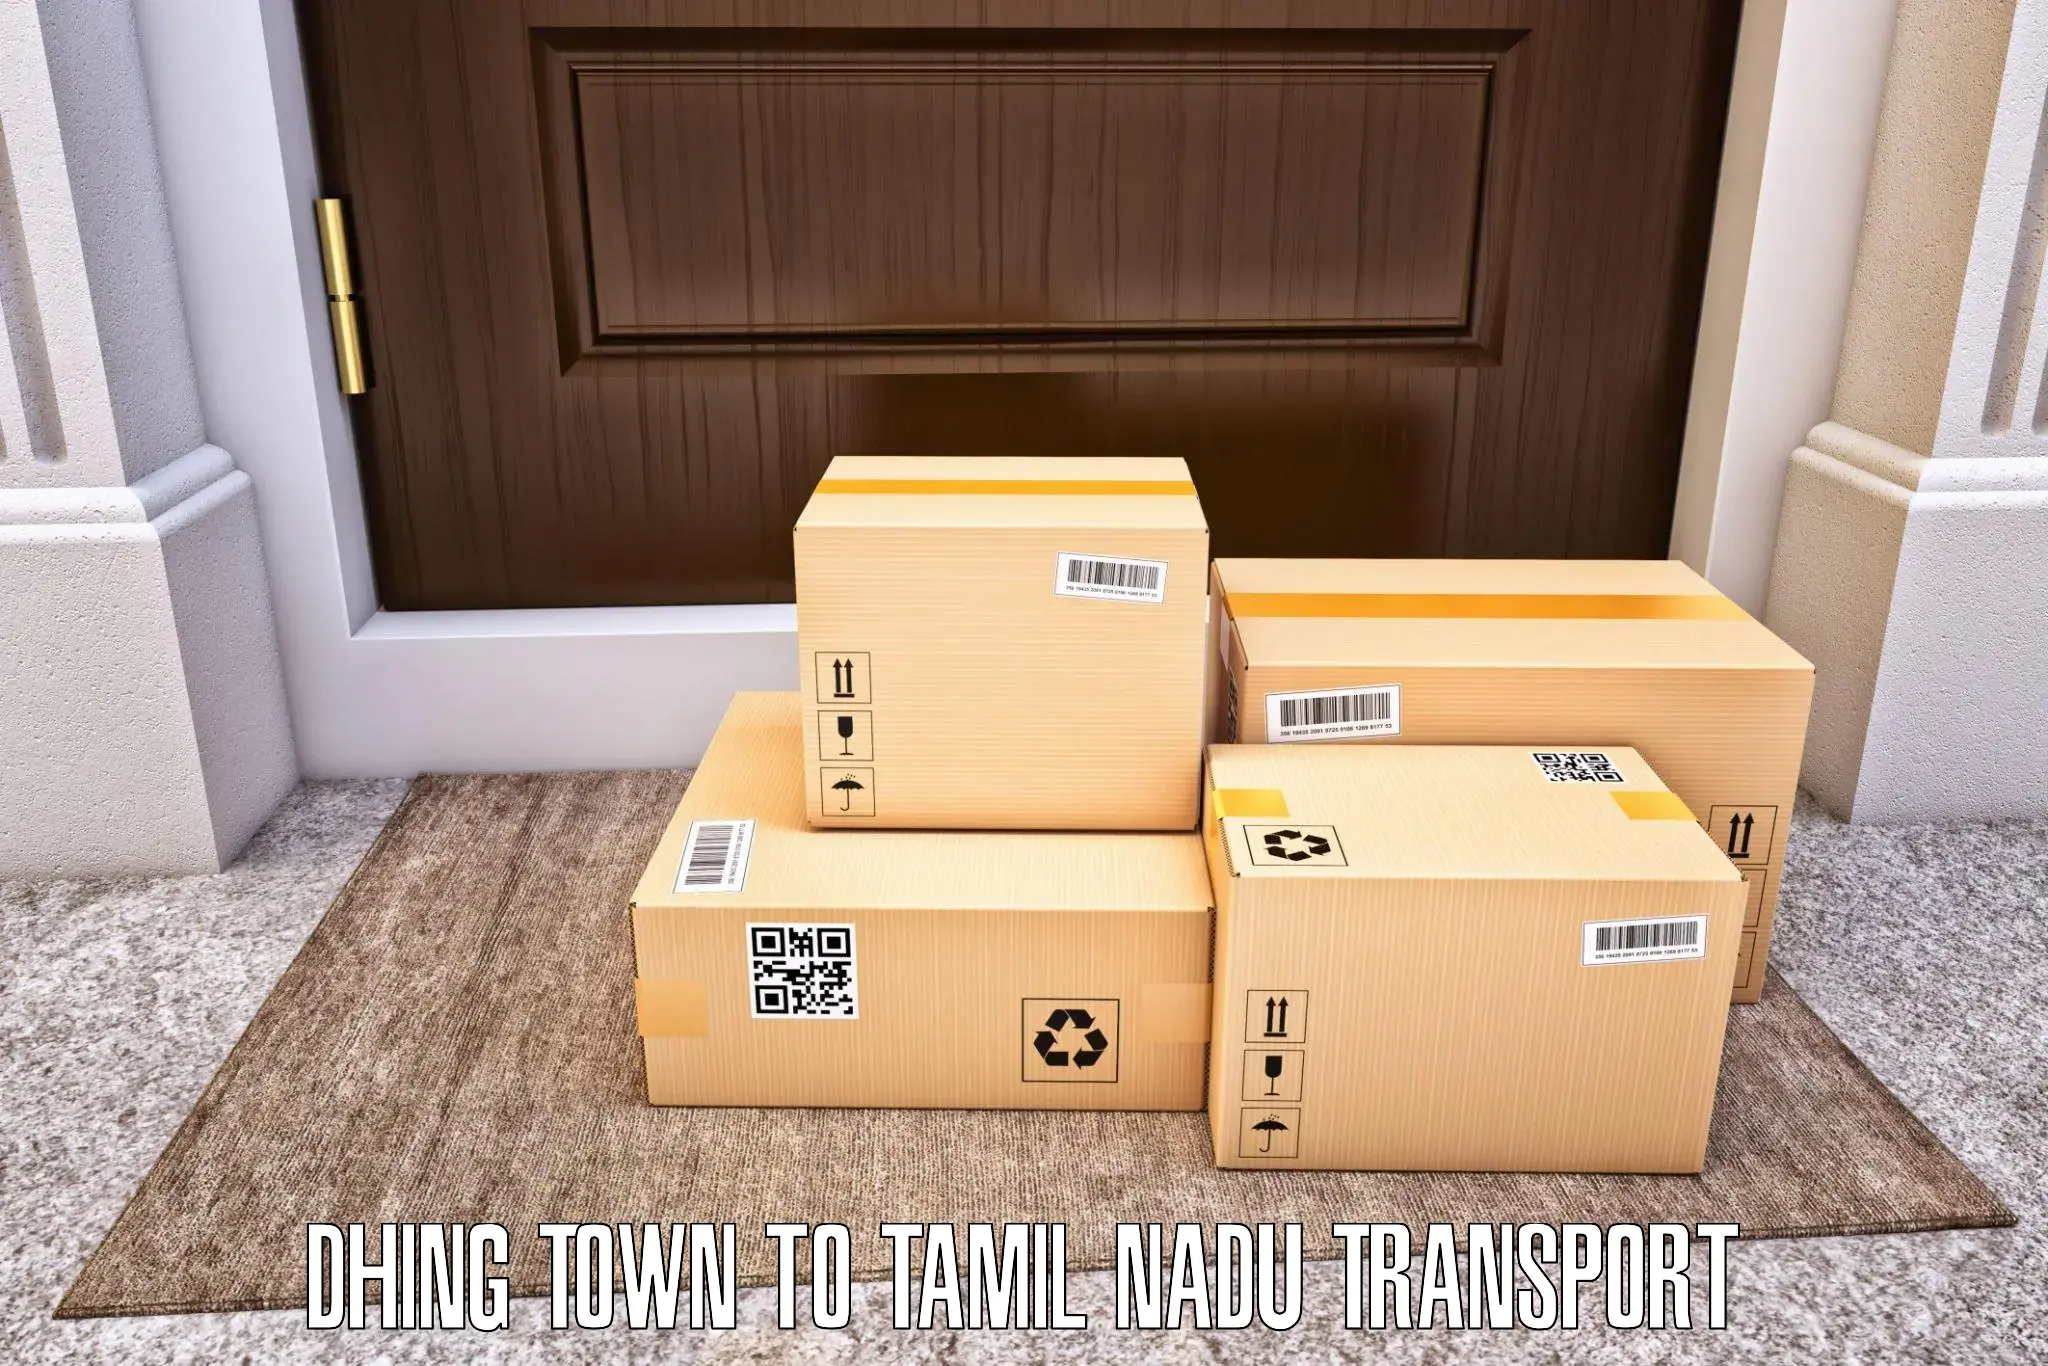 Parcel transport services Dhing Town to Tamil Nadu Agricultural University Coimbatore